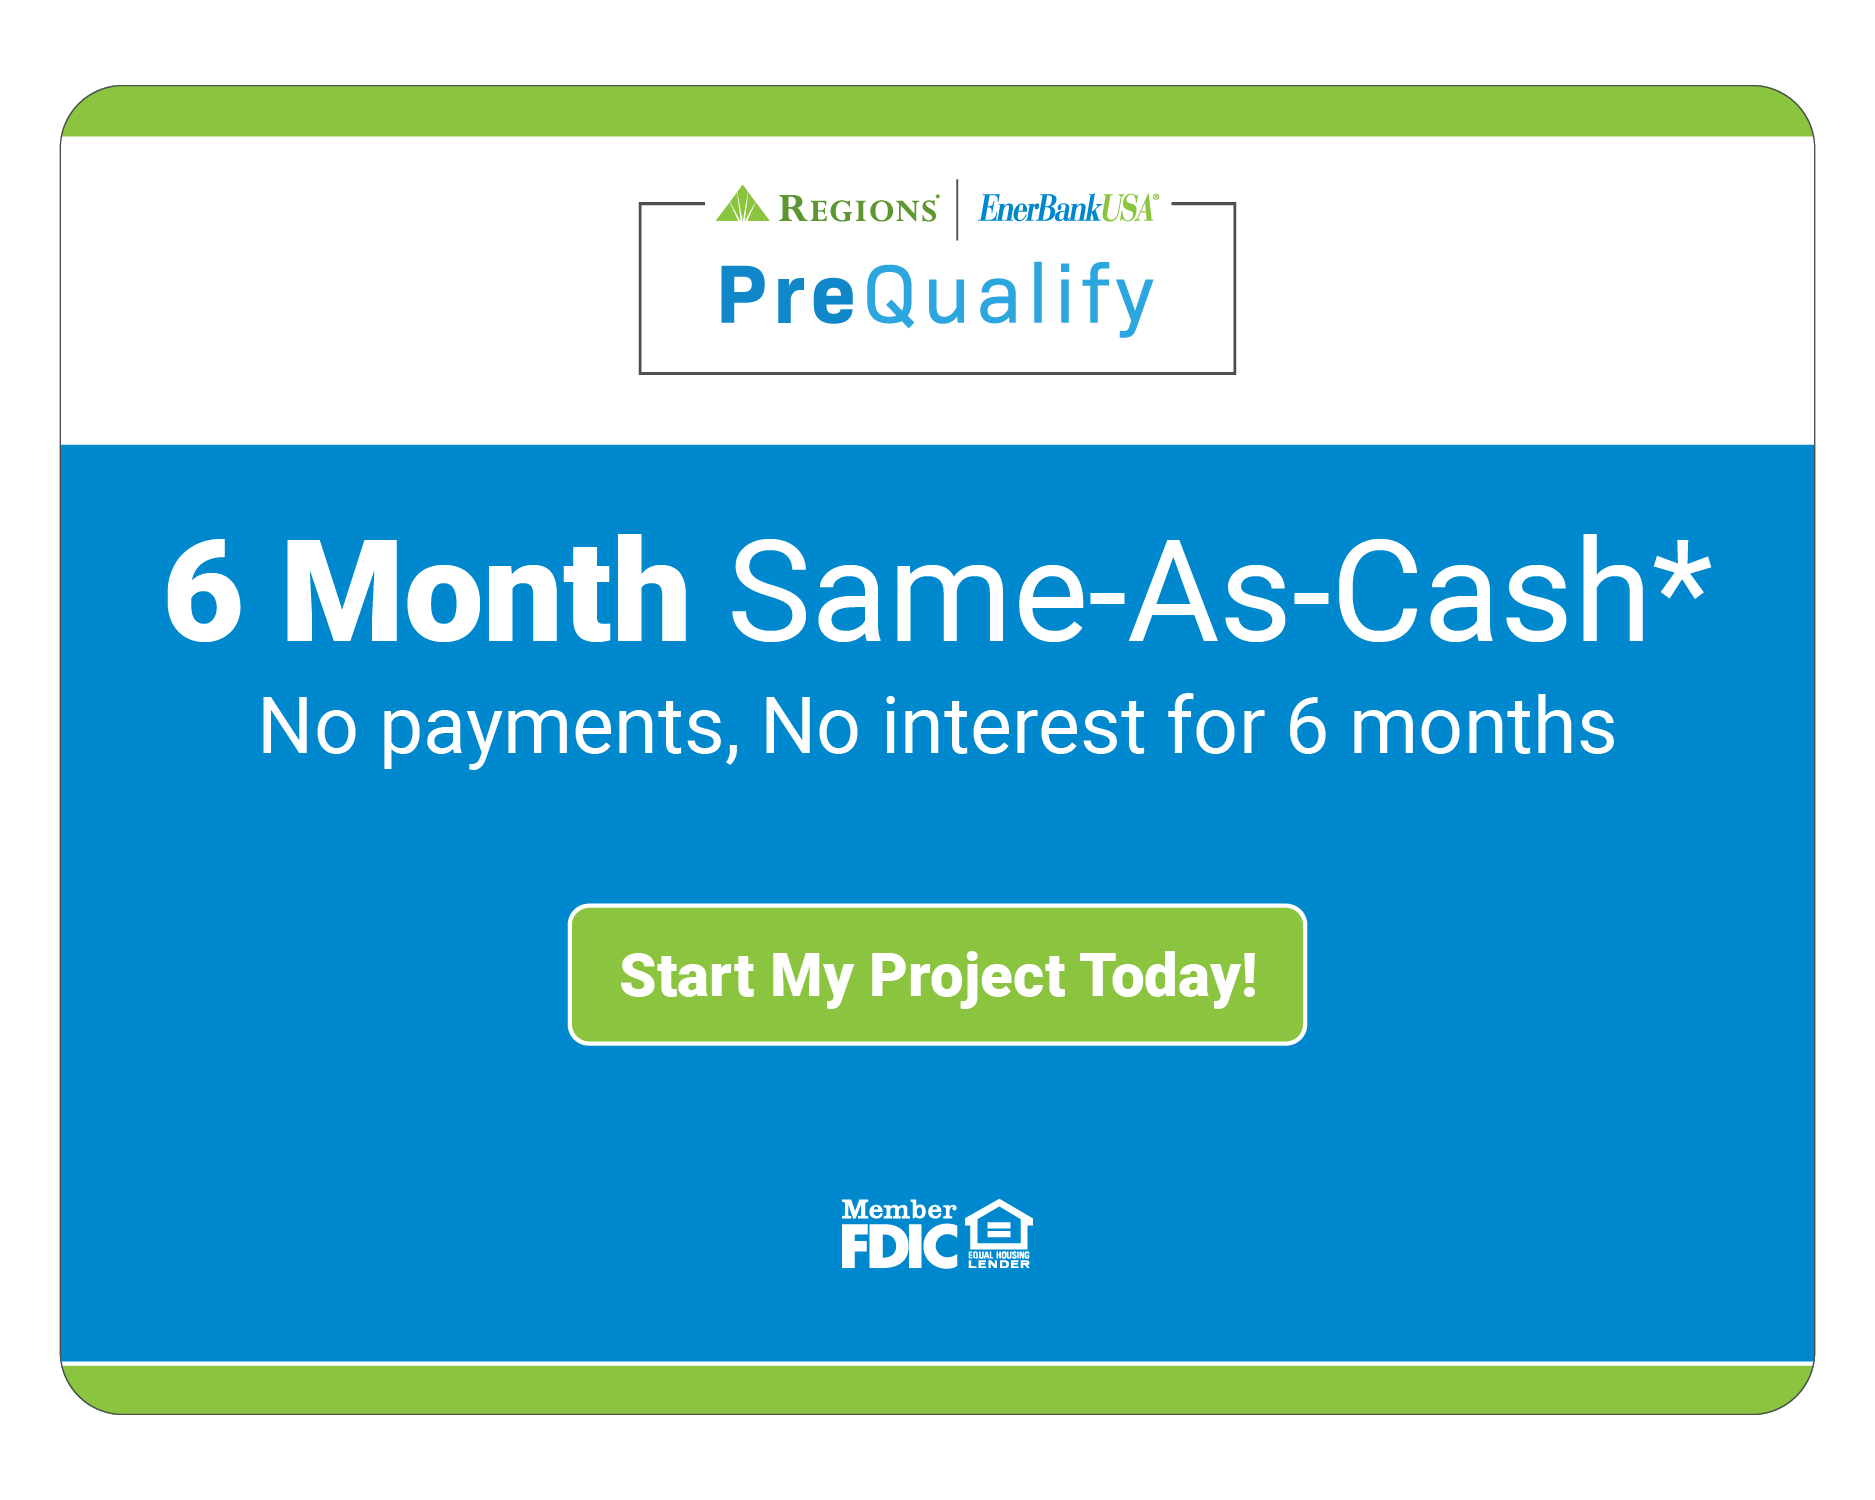 6 Month Same-As-Cash Offer from Enerbank USA